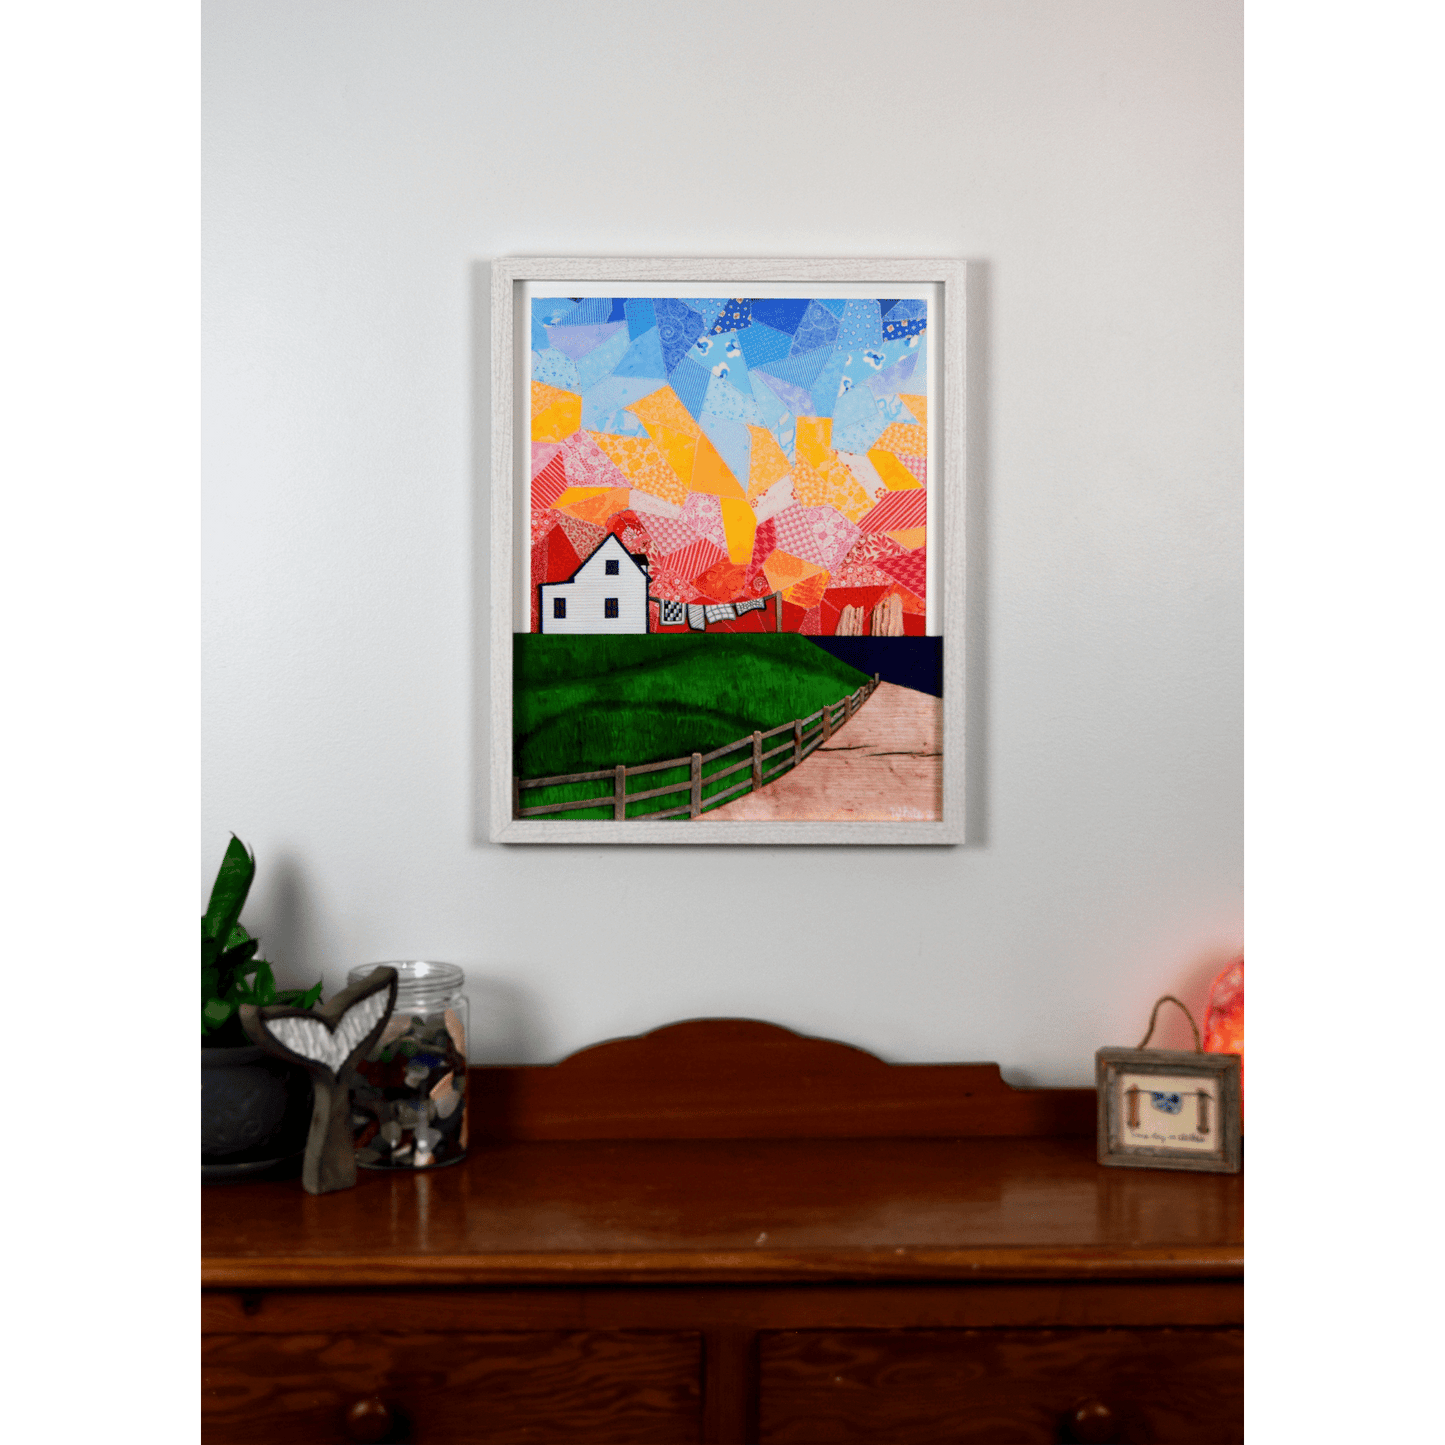  "Twillingate Sunrise" is a serene reproduction print showcasing a house against a patchwork pink and orange sky, with a green lawn and ocean in the foreground.  